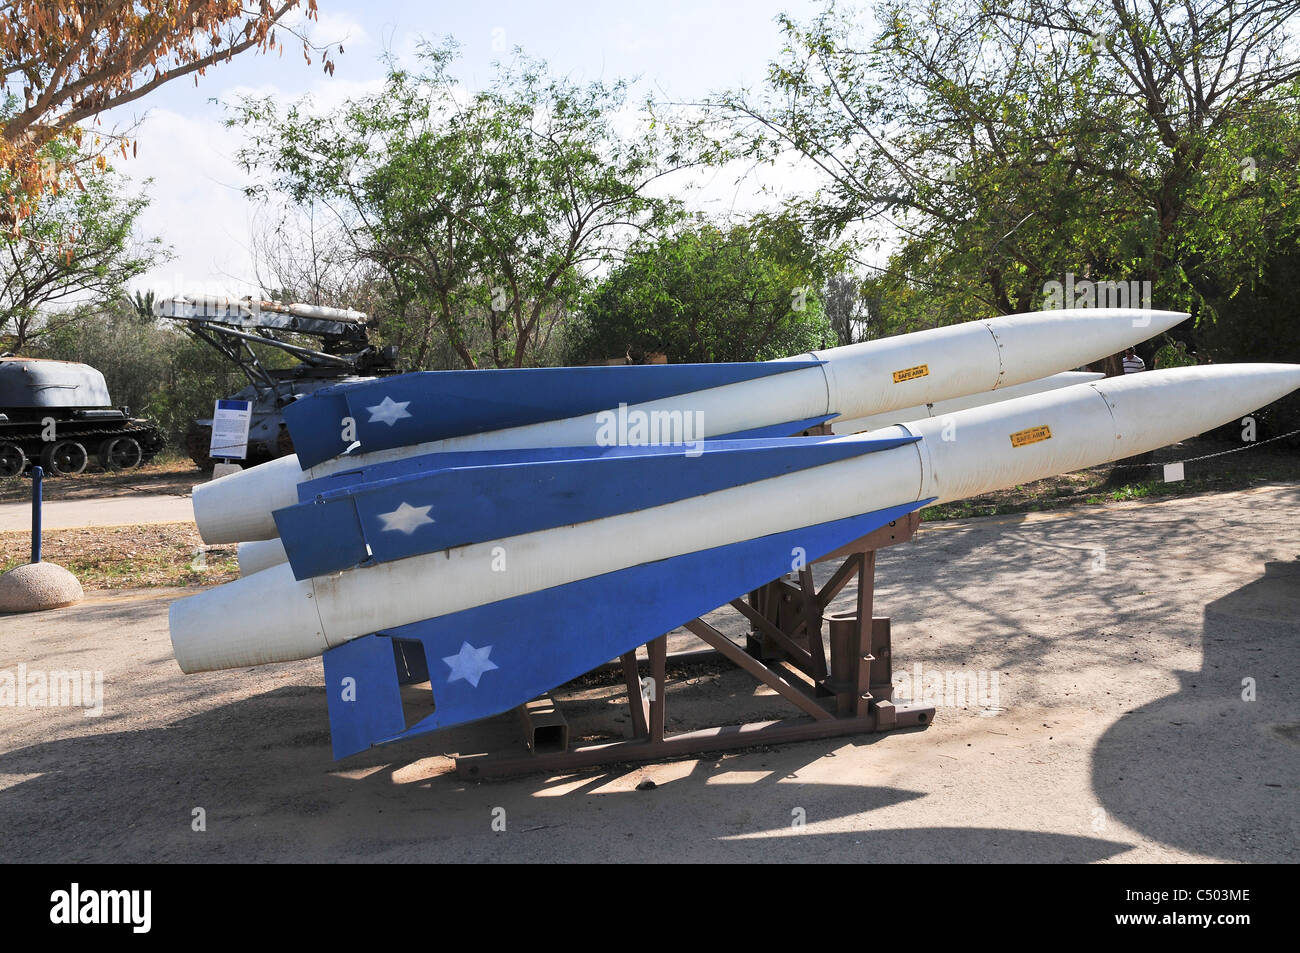 The national centre for Israel's aviation heritage. Anti-aircraft surface-to-air missiles Stock Photo